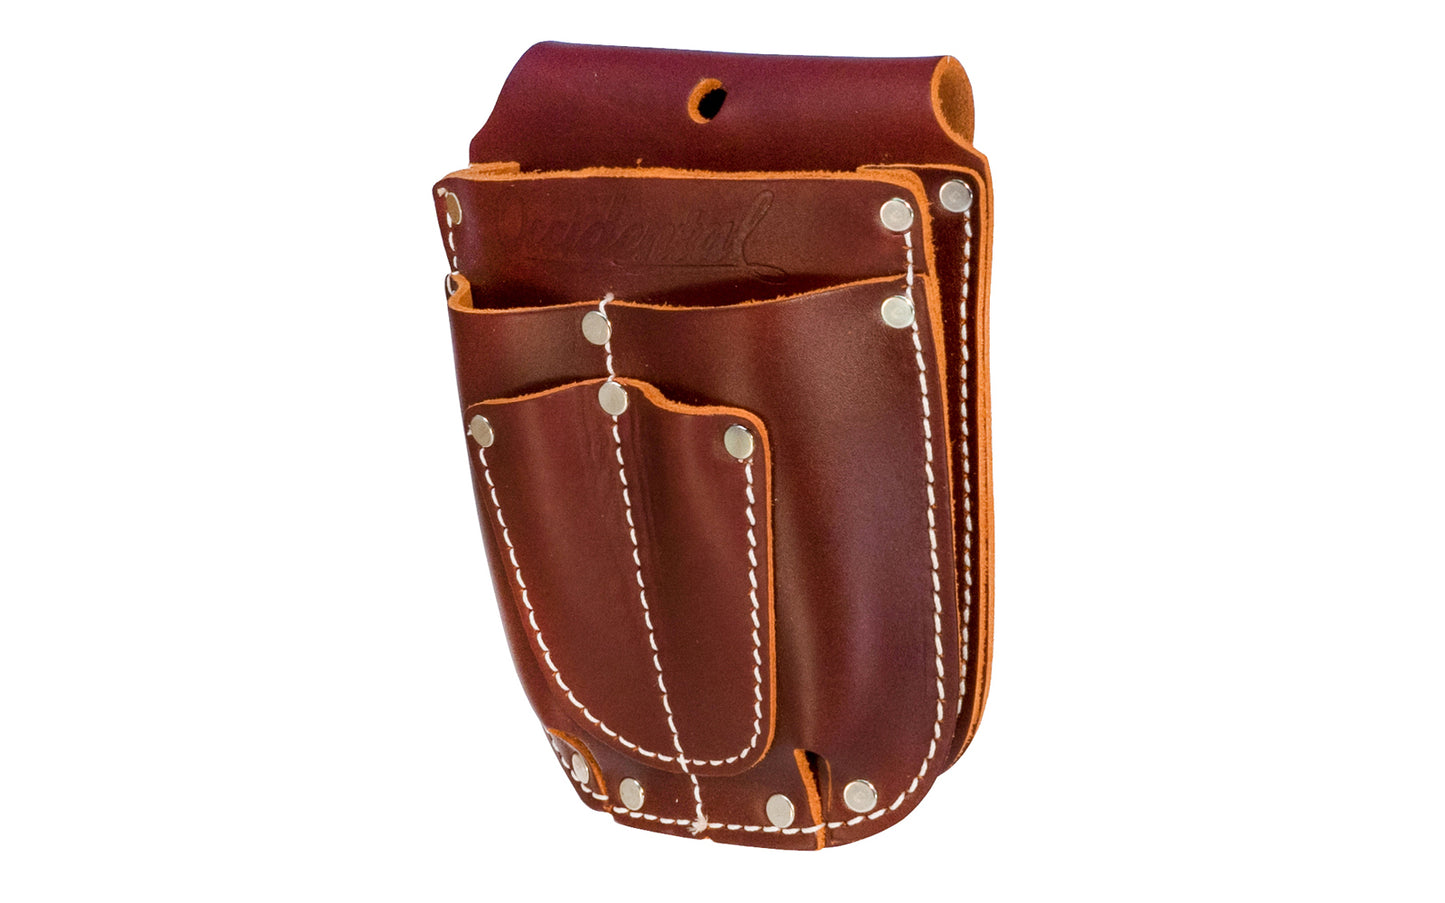 Occidental Leather 5-pocket Organizer Caddy ~ 5100 - Fits up to 2" work belt - Leather Pocket Organizer - Riveted - Holster - Belt Caddy  - Occidental Holder - Occidental Leather Pocket Caddy - Tool Caddy - 5 pocket tool organizer Ideal for small repair work, shop workers, gardeners, farm repair, & cabinetmakers - Five Pocket Caddy